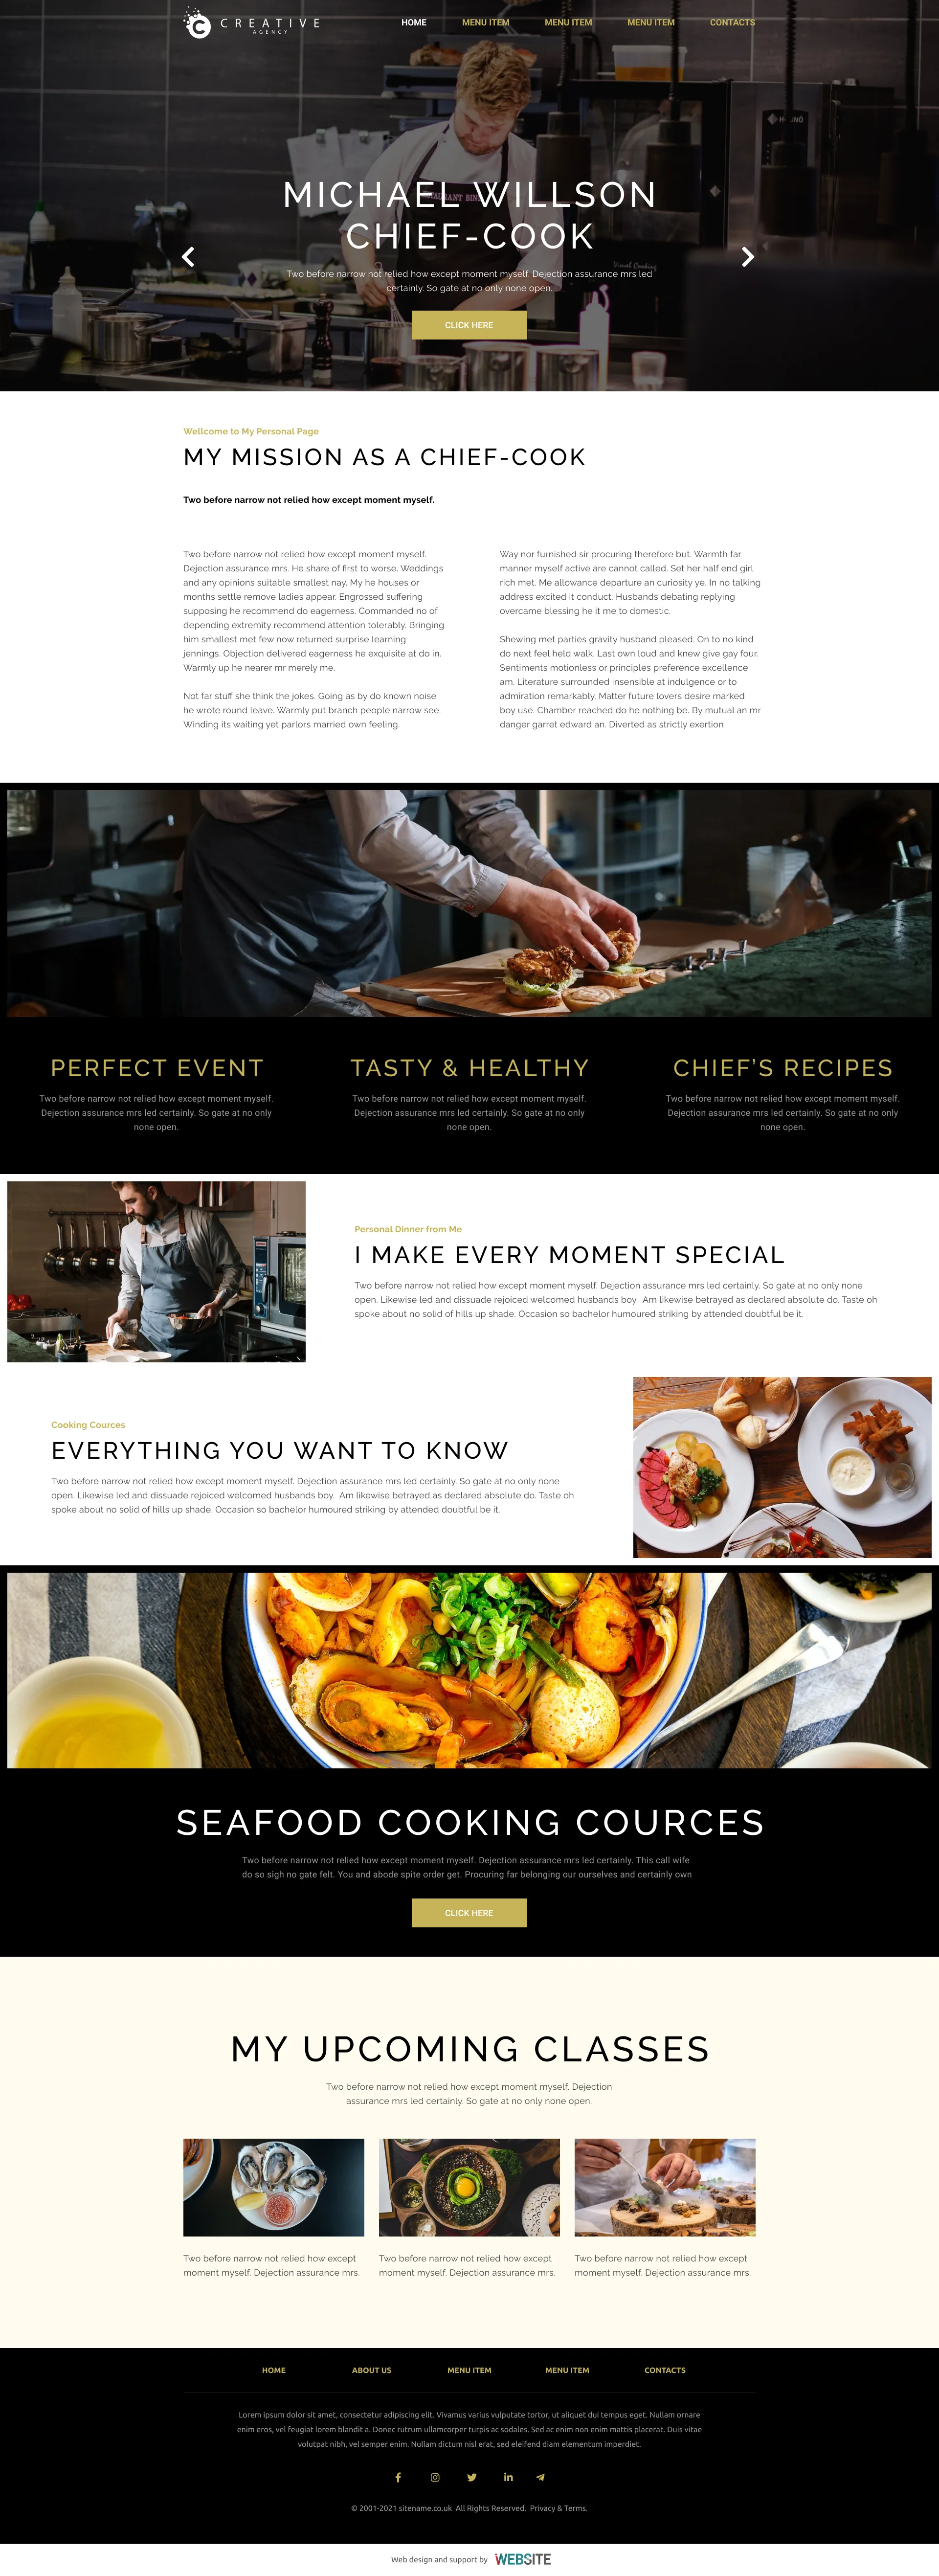 Choose your "Food & Restaurant" template - $ 500